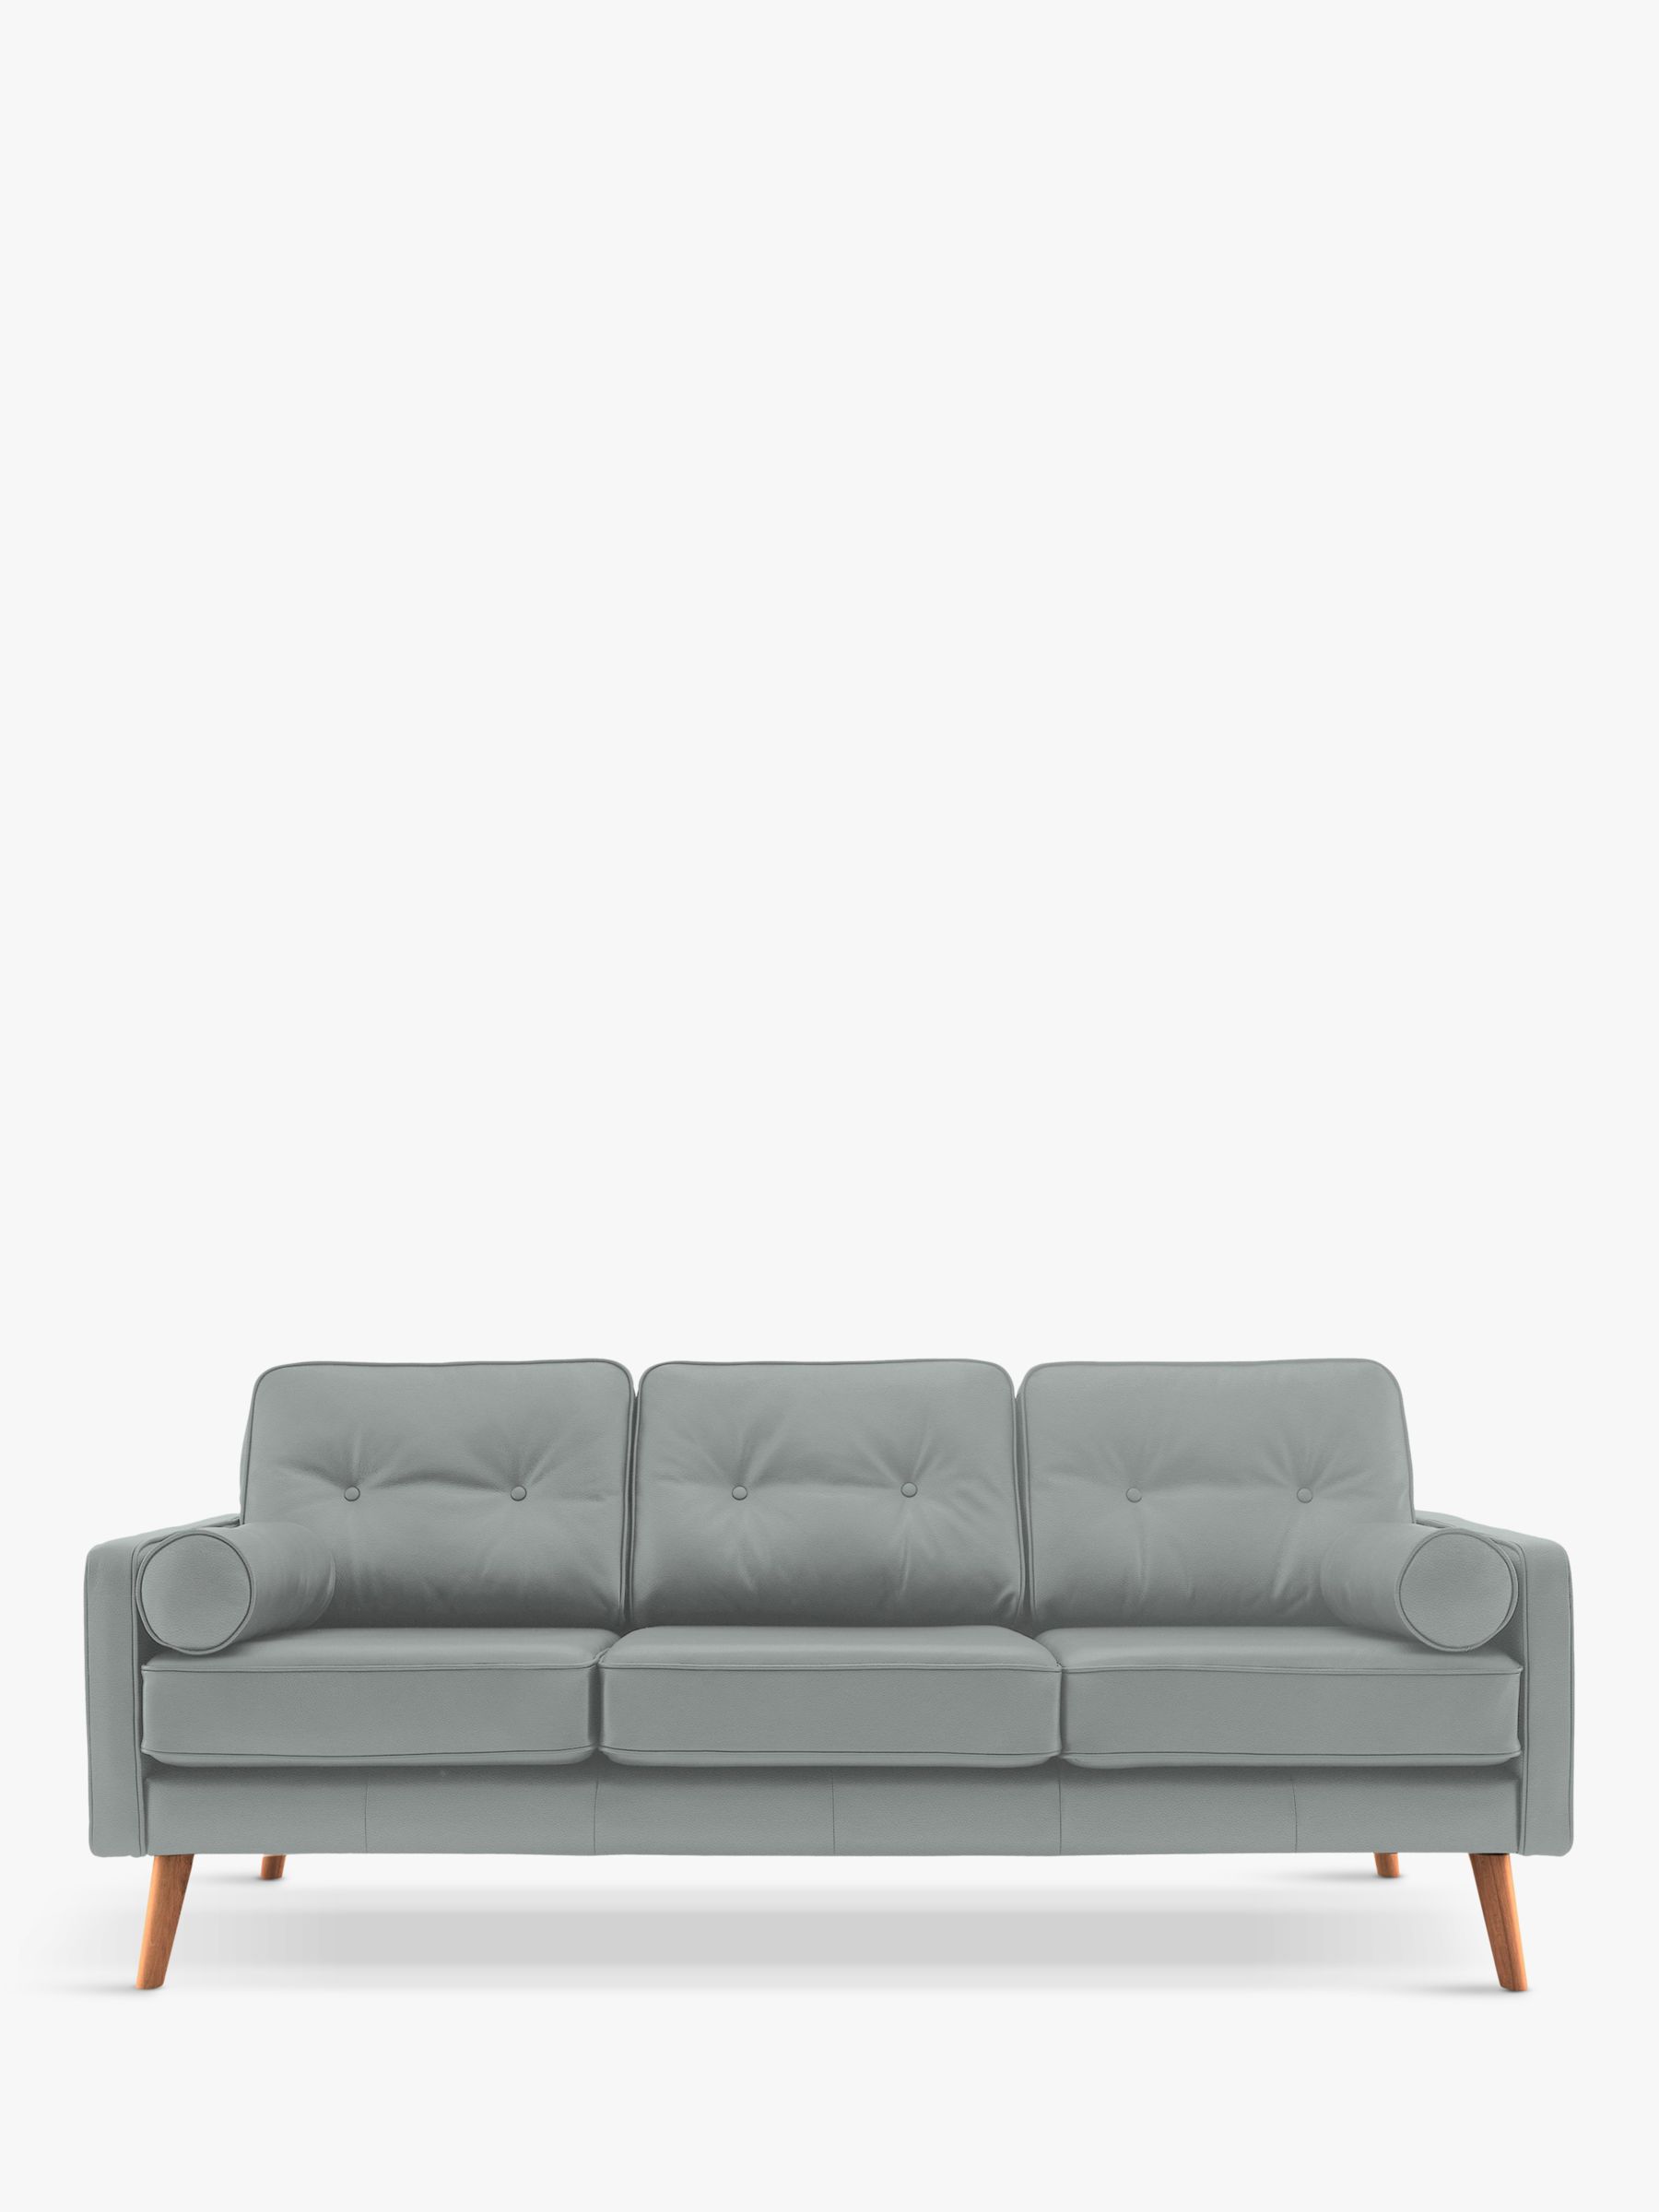 The Sixty Five Range, G Plan Vintage The Sixty Five Large 3 Seater Leather Sofa, Cambridge Grey